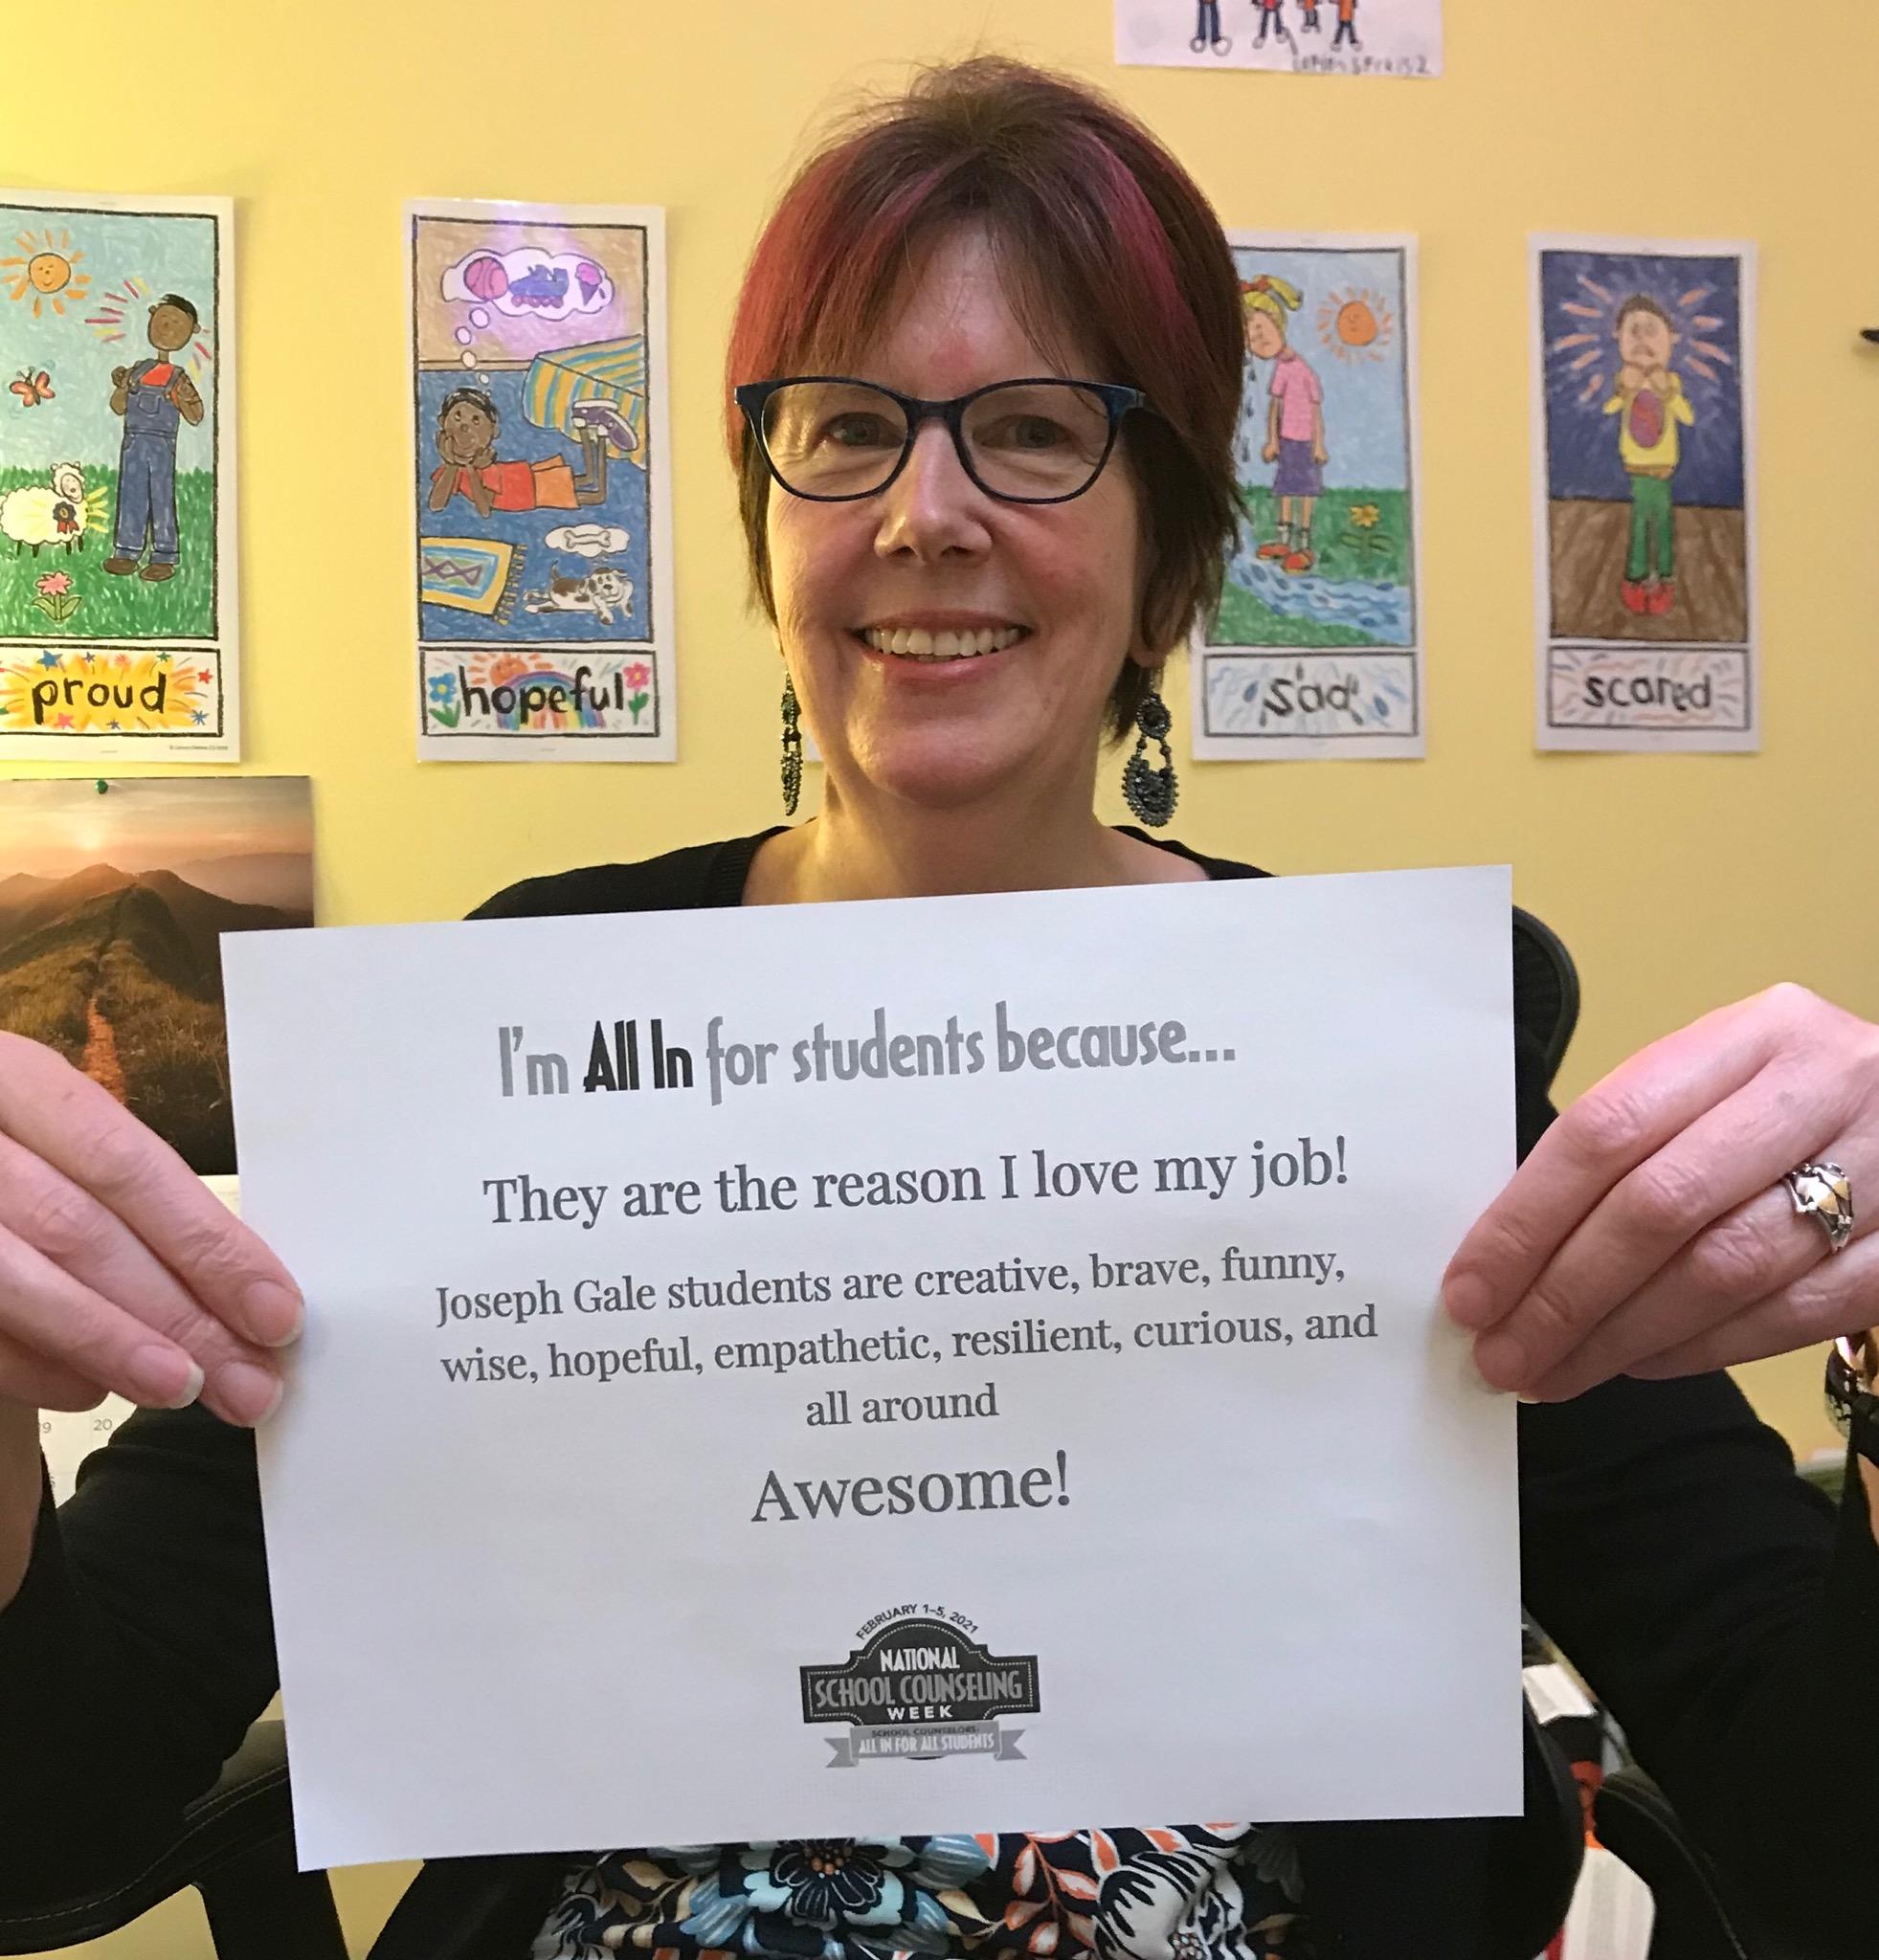 Nora Saunderson with a sign "I'm all in fo rstudents because they are the reason I love my job! Joseph Gale students are creative, brave, gunny, wise, hopeful, empathetic, resilient, curious and all around awesome. 